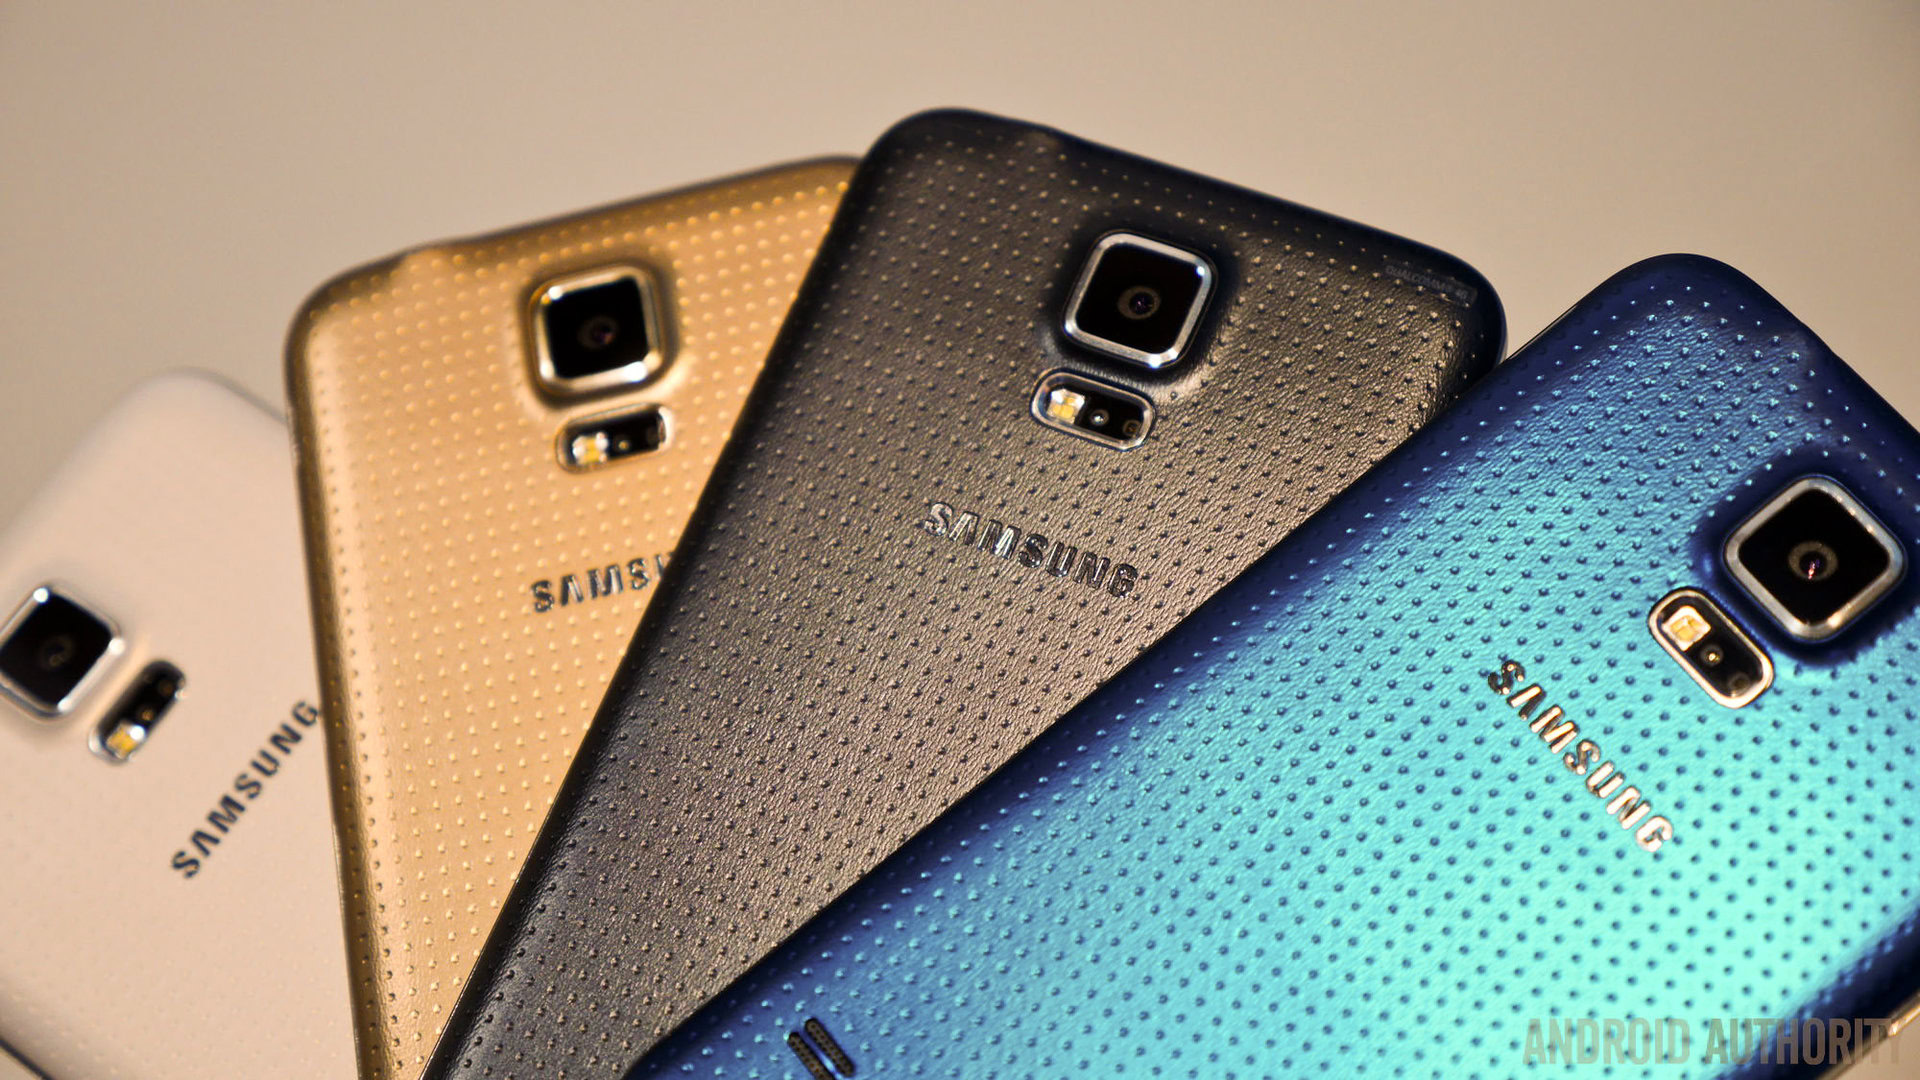 Samsung Galaxy S prices: they changed over time - Android Authority